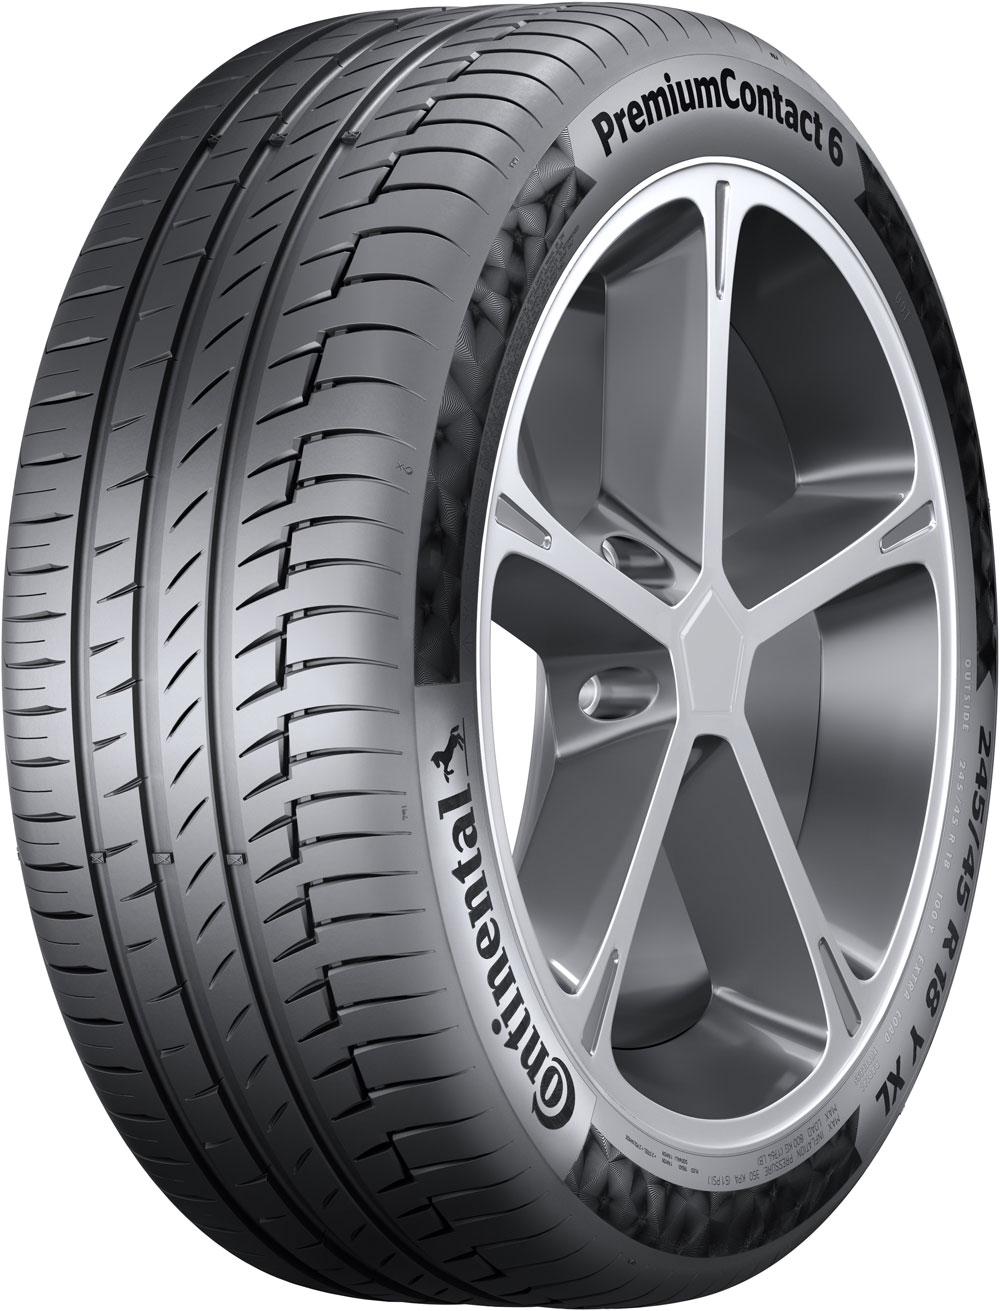 Anvelope jeep CONTINENTAL PREMIUM 6 MO MERCEDES FP 325/40 R22 114Y